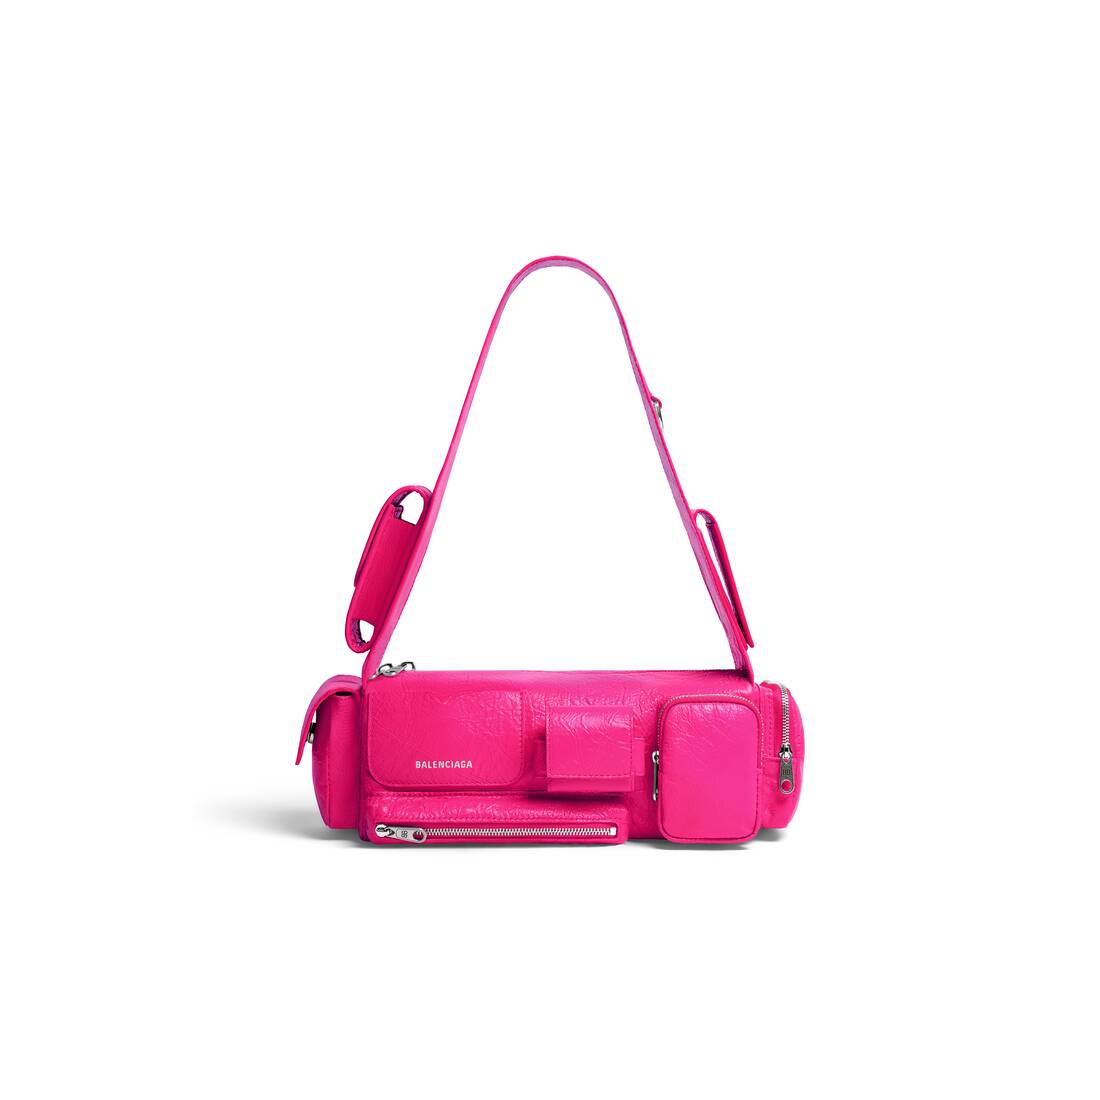 Superbusy Xs Sling Bag in Bright Pink